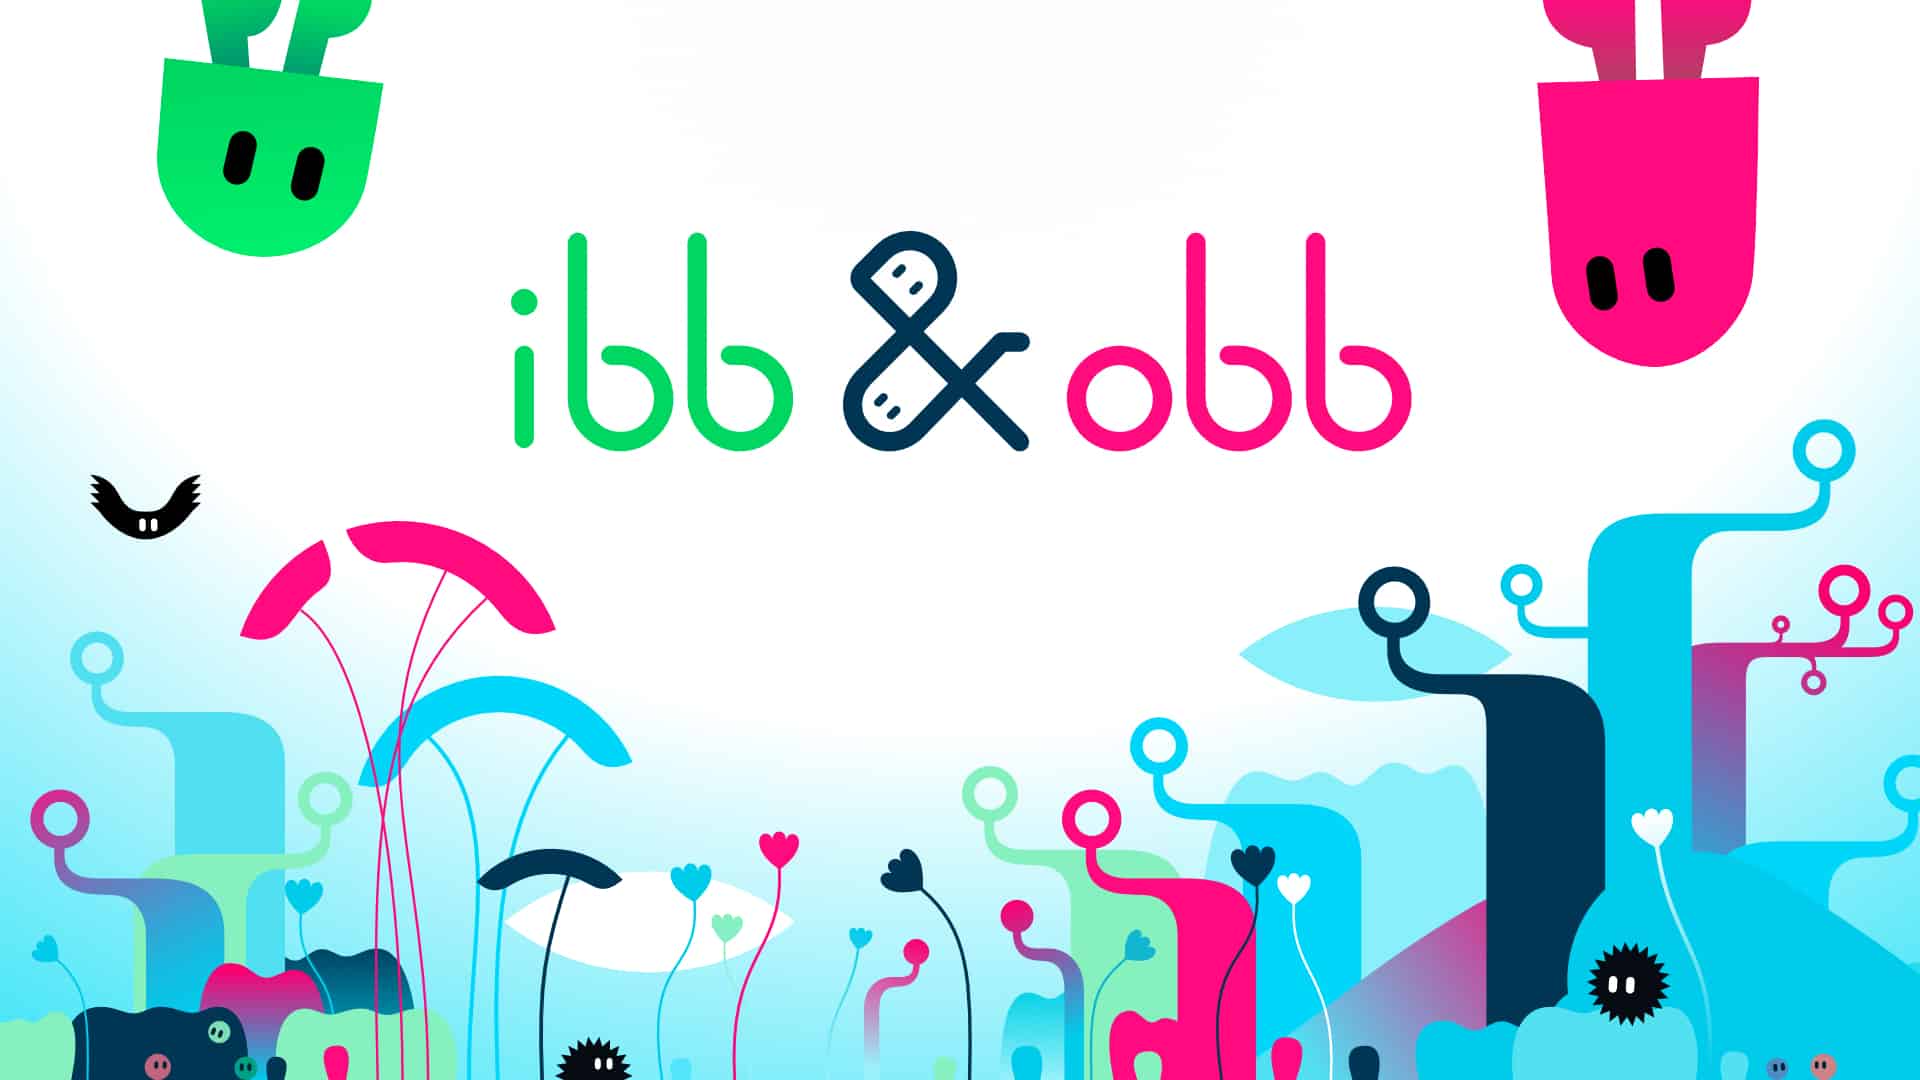 Ibb & Obb player count stats